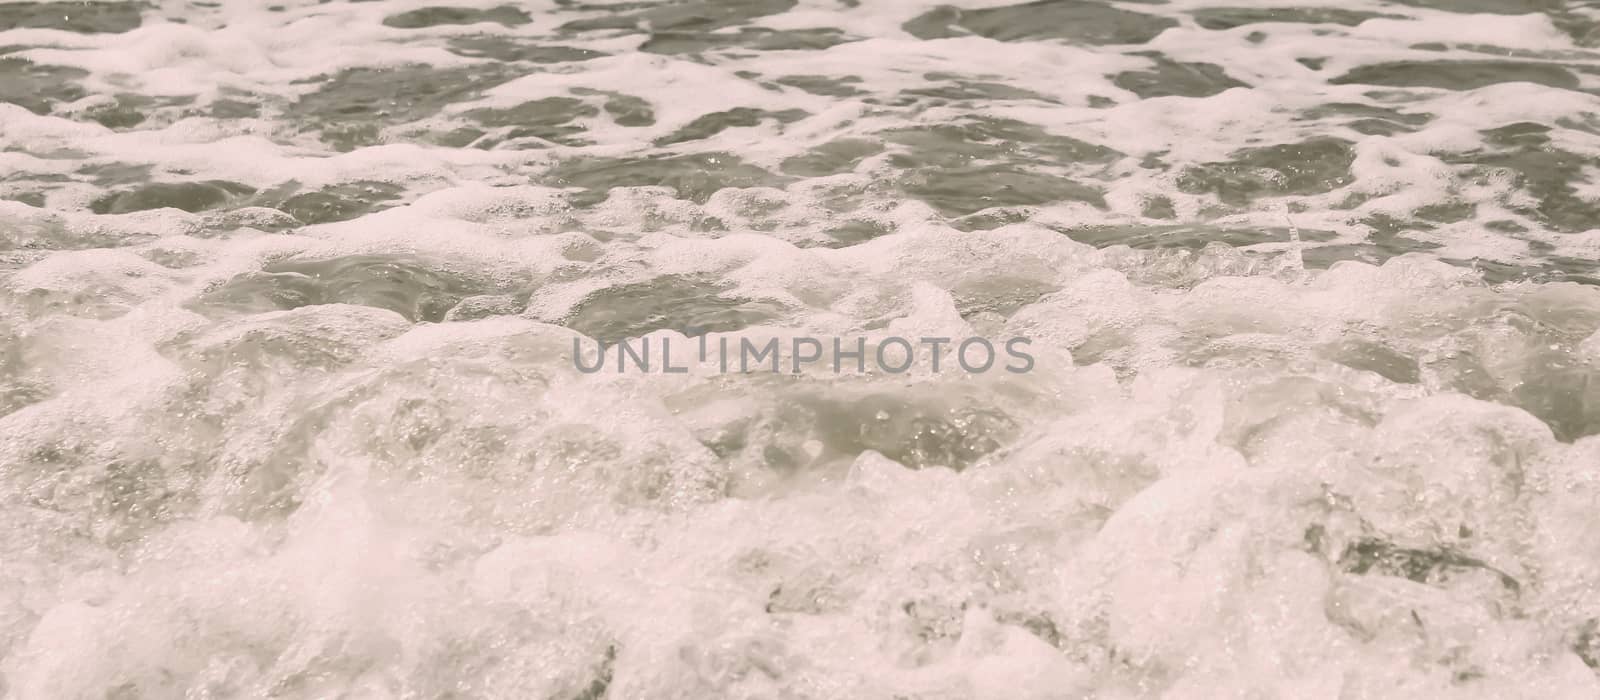 High Angle View Of Rippling Splashing Ocean Waves. Rippled sea water wave Wallpaper wet background decor for mobile and desktop screens. Vintage retro style colour effect. Copy space room for text.